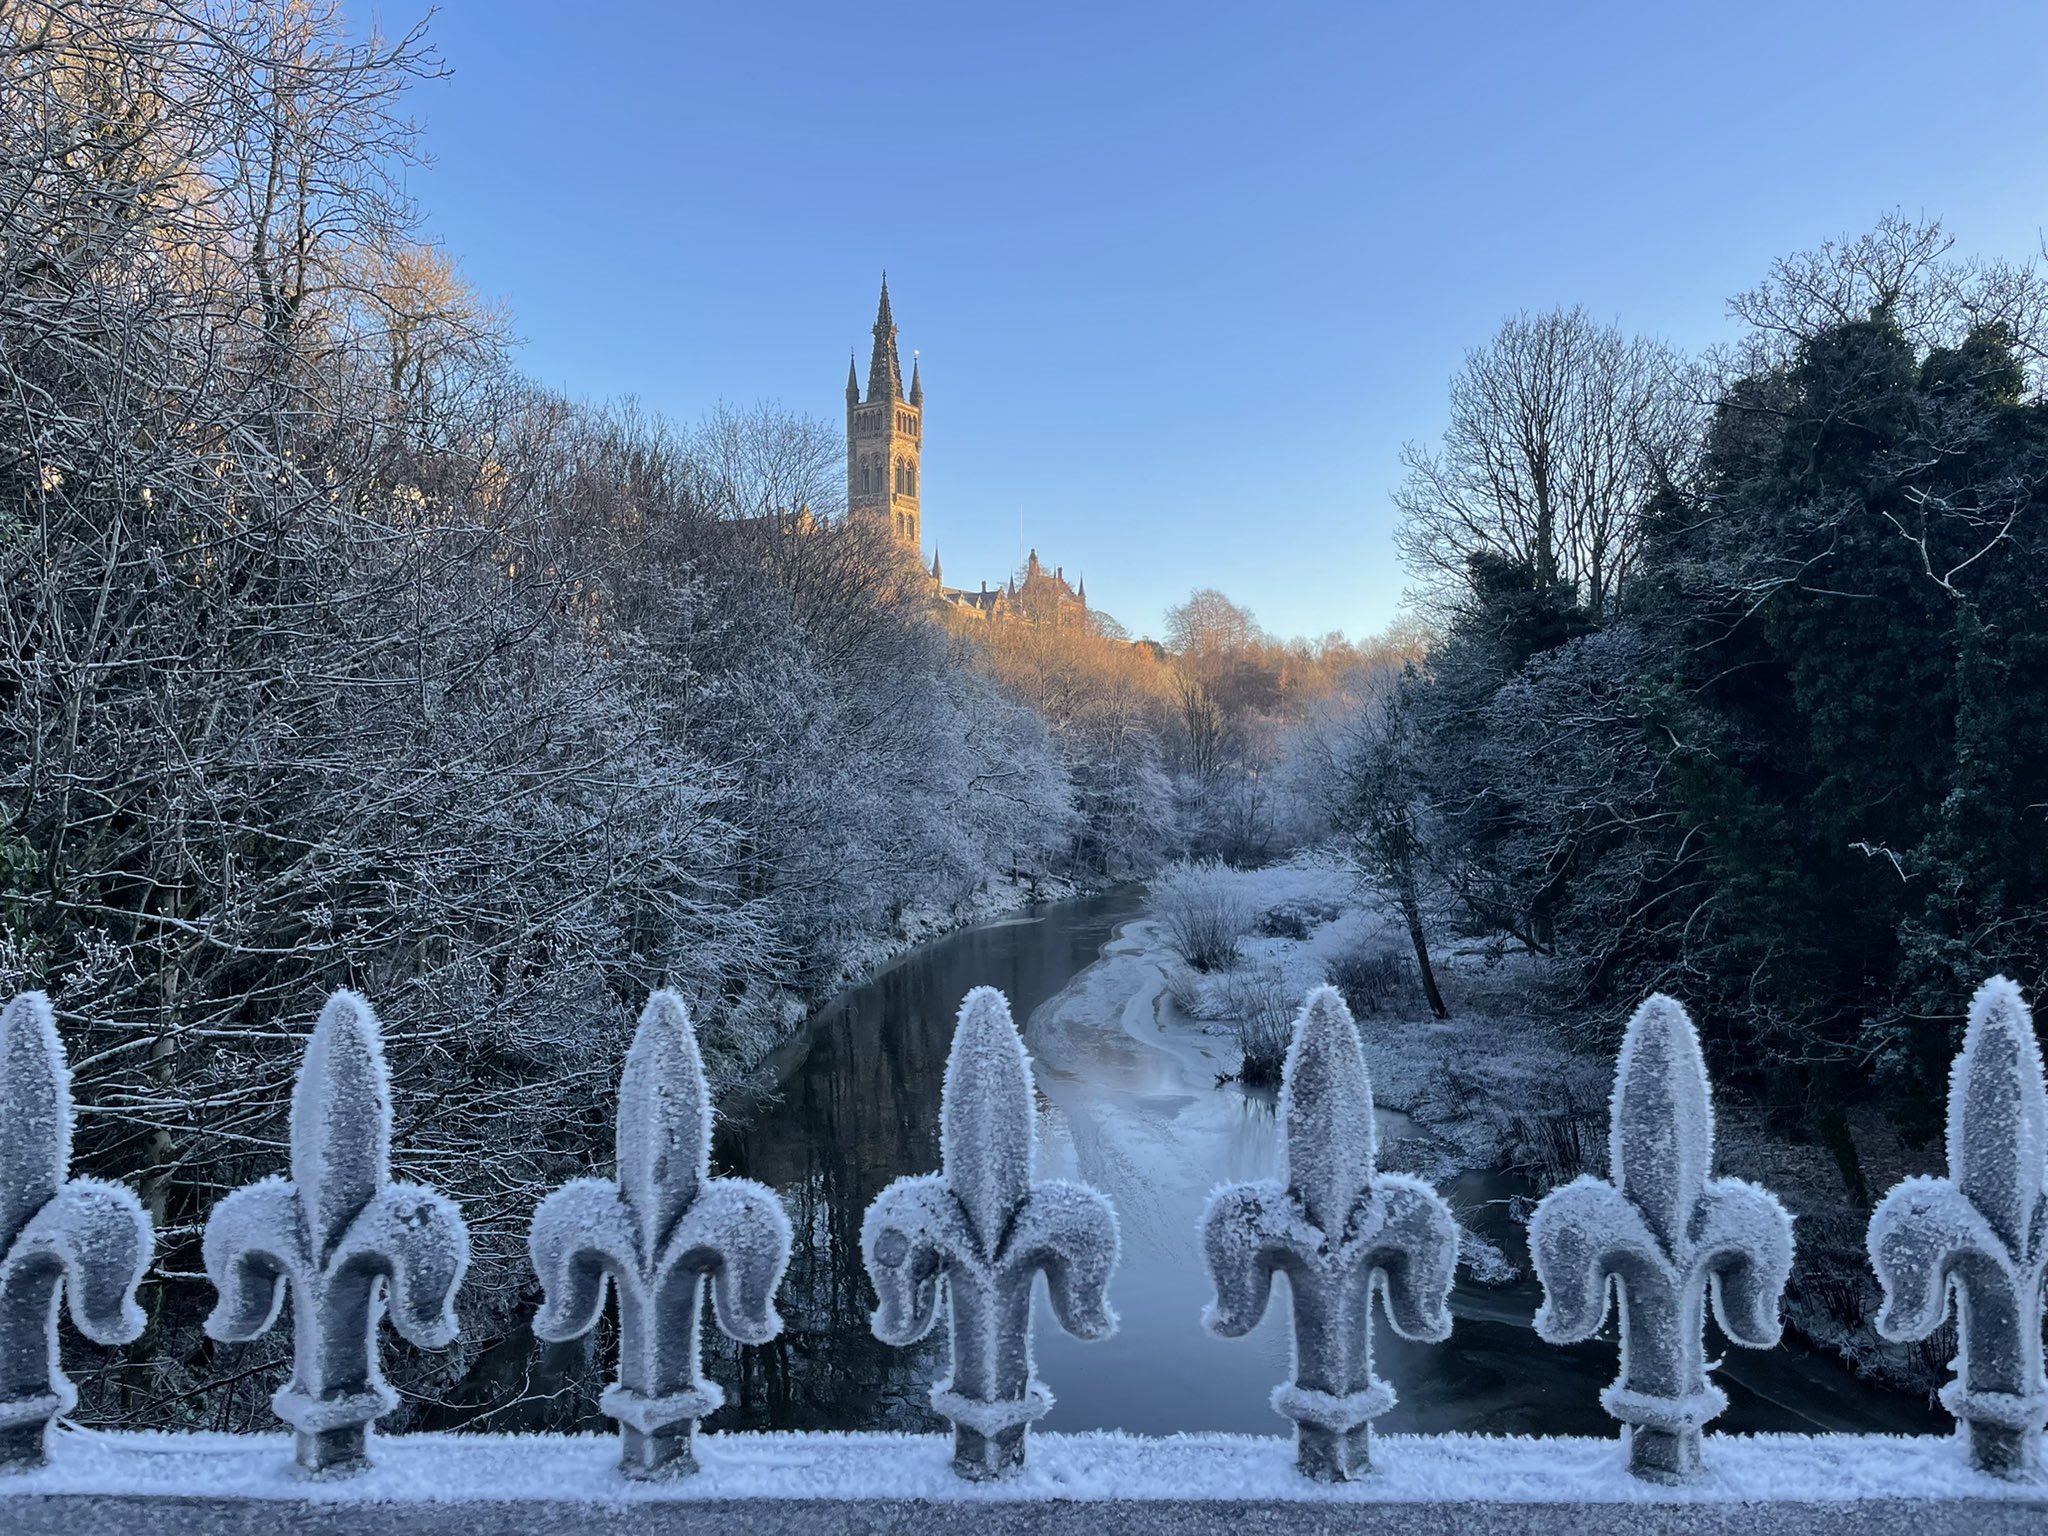 The University of Glasgow in the frost. Taken by Cameron Maclean.